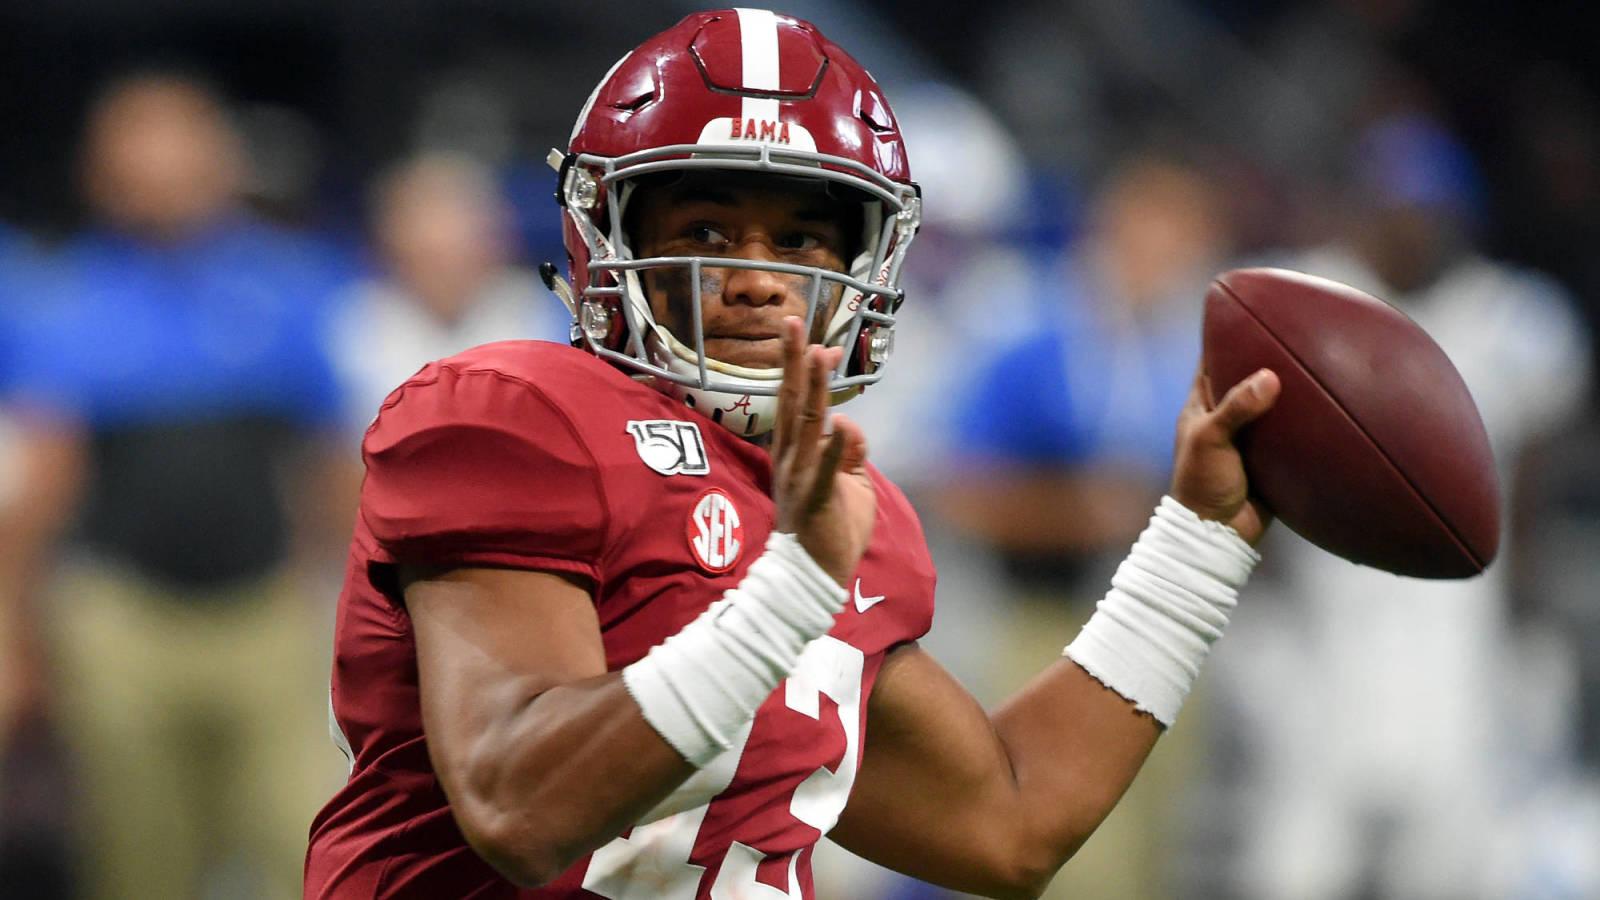 Nick Saban had to tell Tua Tagovailoa to stop working out so